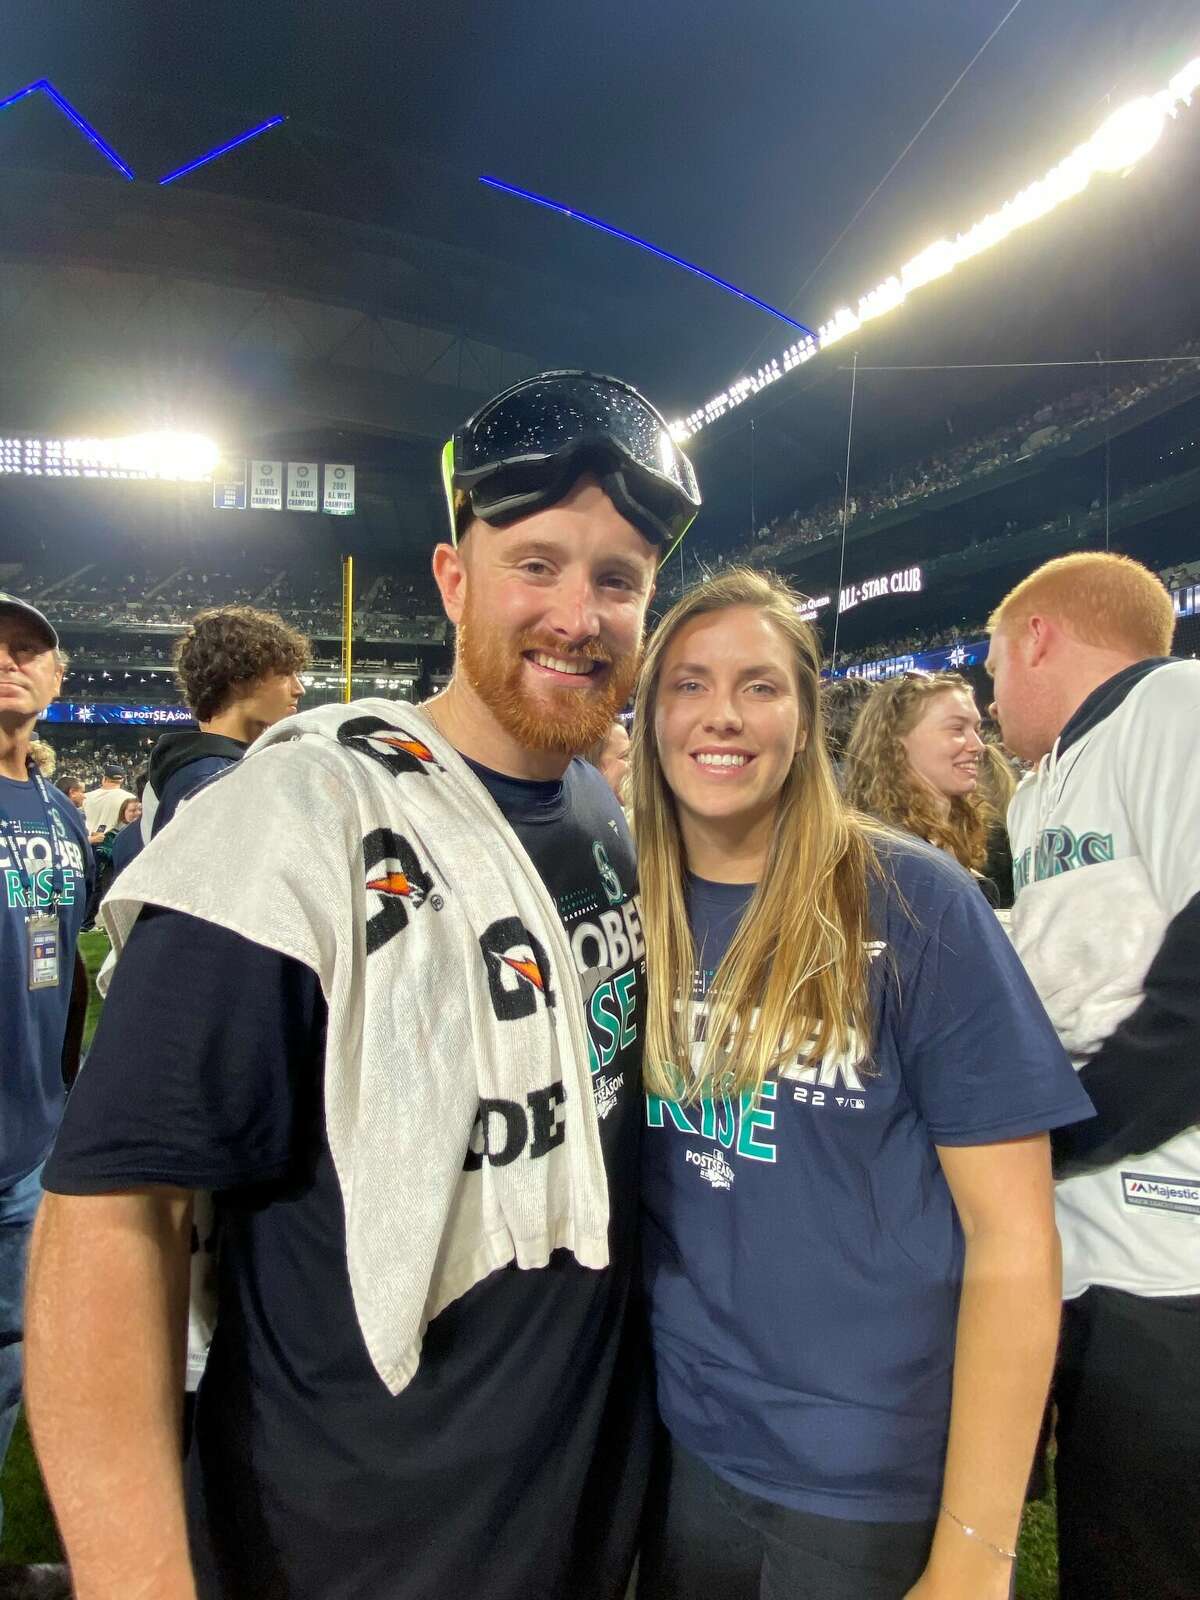 The Mariners’ Brian O’Keefe is seen with Emily Nonnemacher, his fiancée, after O’Keefe joined the big leagues  Friday, Sept. 30, 2022 at T-Mobile Park in Seattle, the day the Mariners clinched the playoffs for the first time in 20 years. He got his first start and first Major League hit on Saturday. (Photo by Susan O'Keefe)